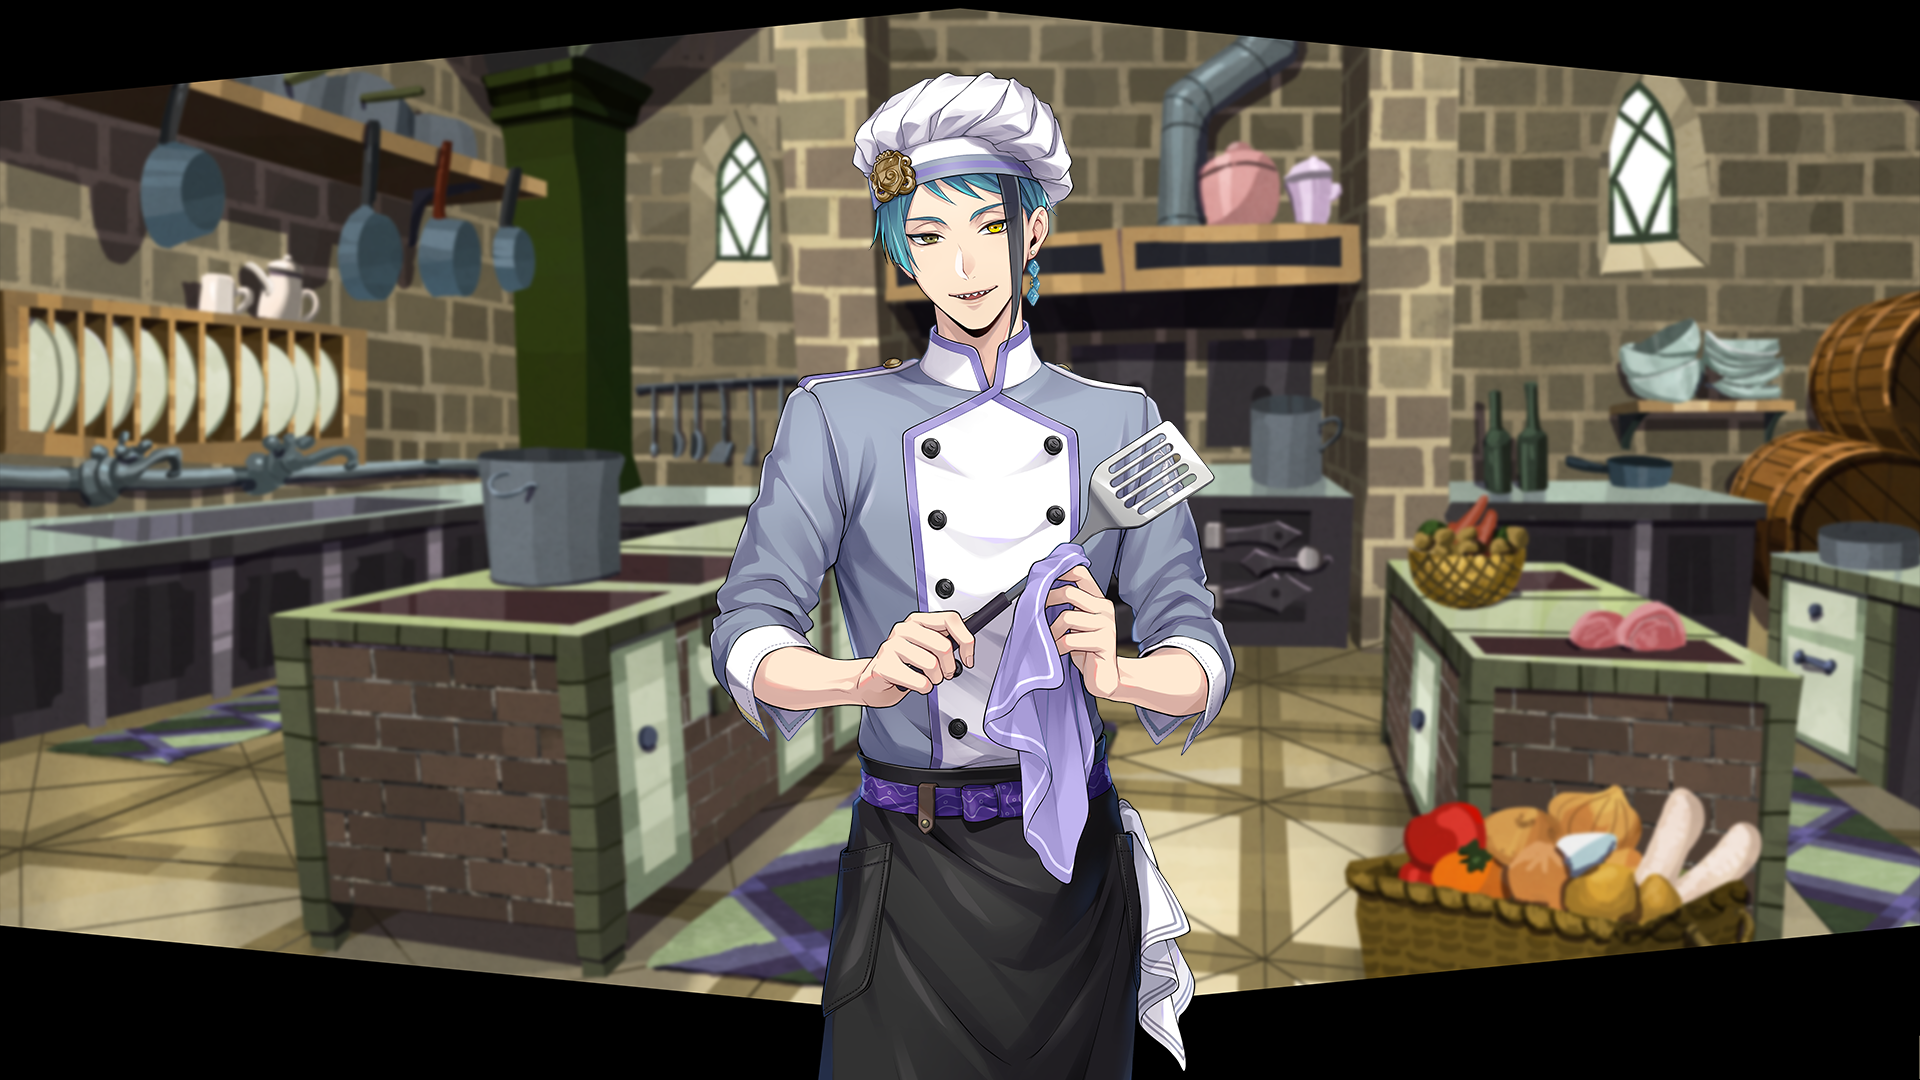 https://static.wikia.nocookie.net/twisted-wonderland/images/8/8c/Card_Jade_SR_Apprentice_Chef.png/revision/latest/scale-to-width-down/1920?cb=20210813174818